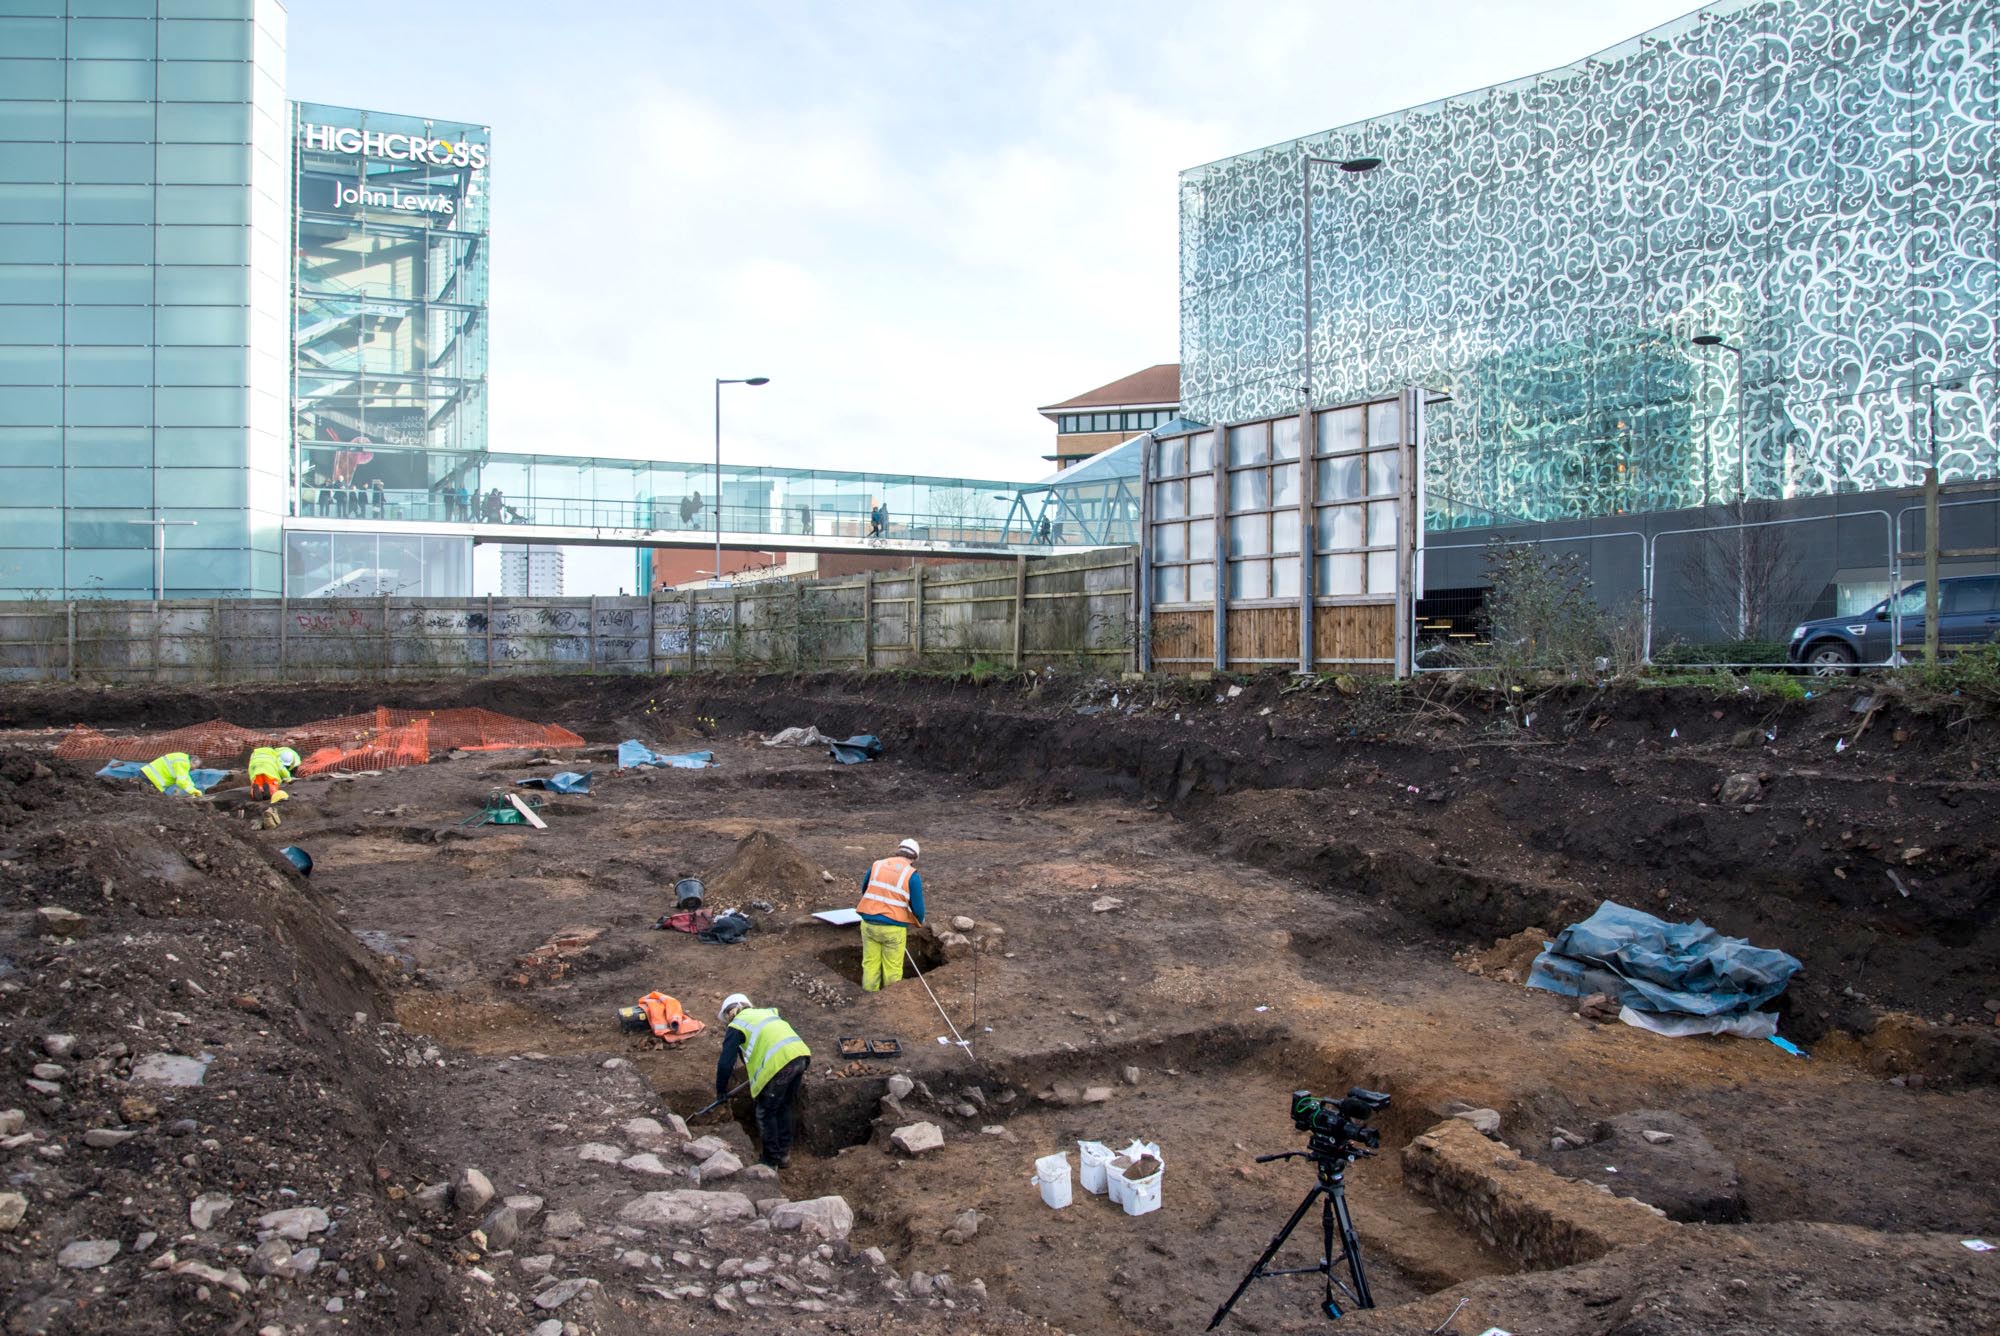 The archaeological dig seen here took place in 2017 was very close to the original Vine Street dig site -